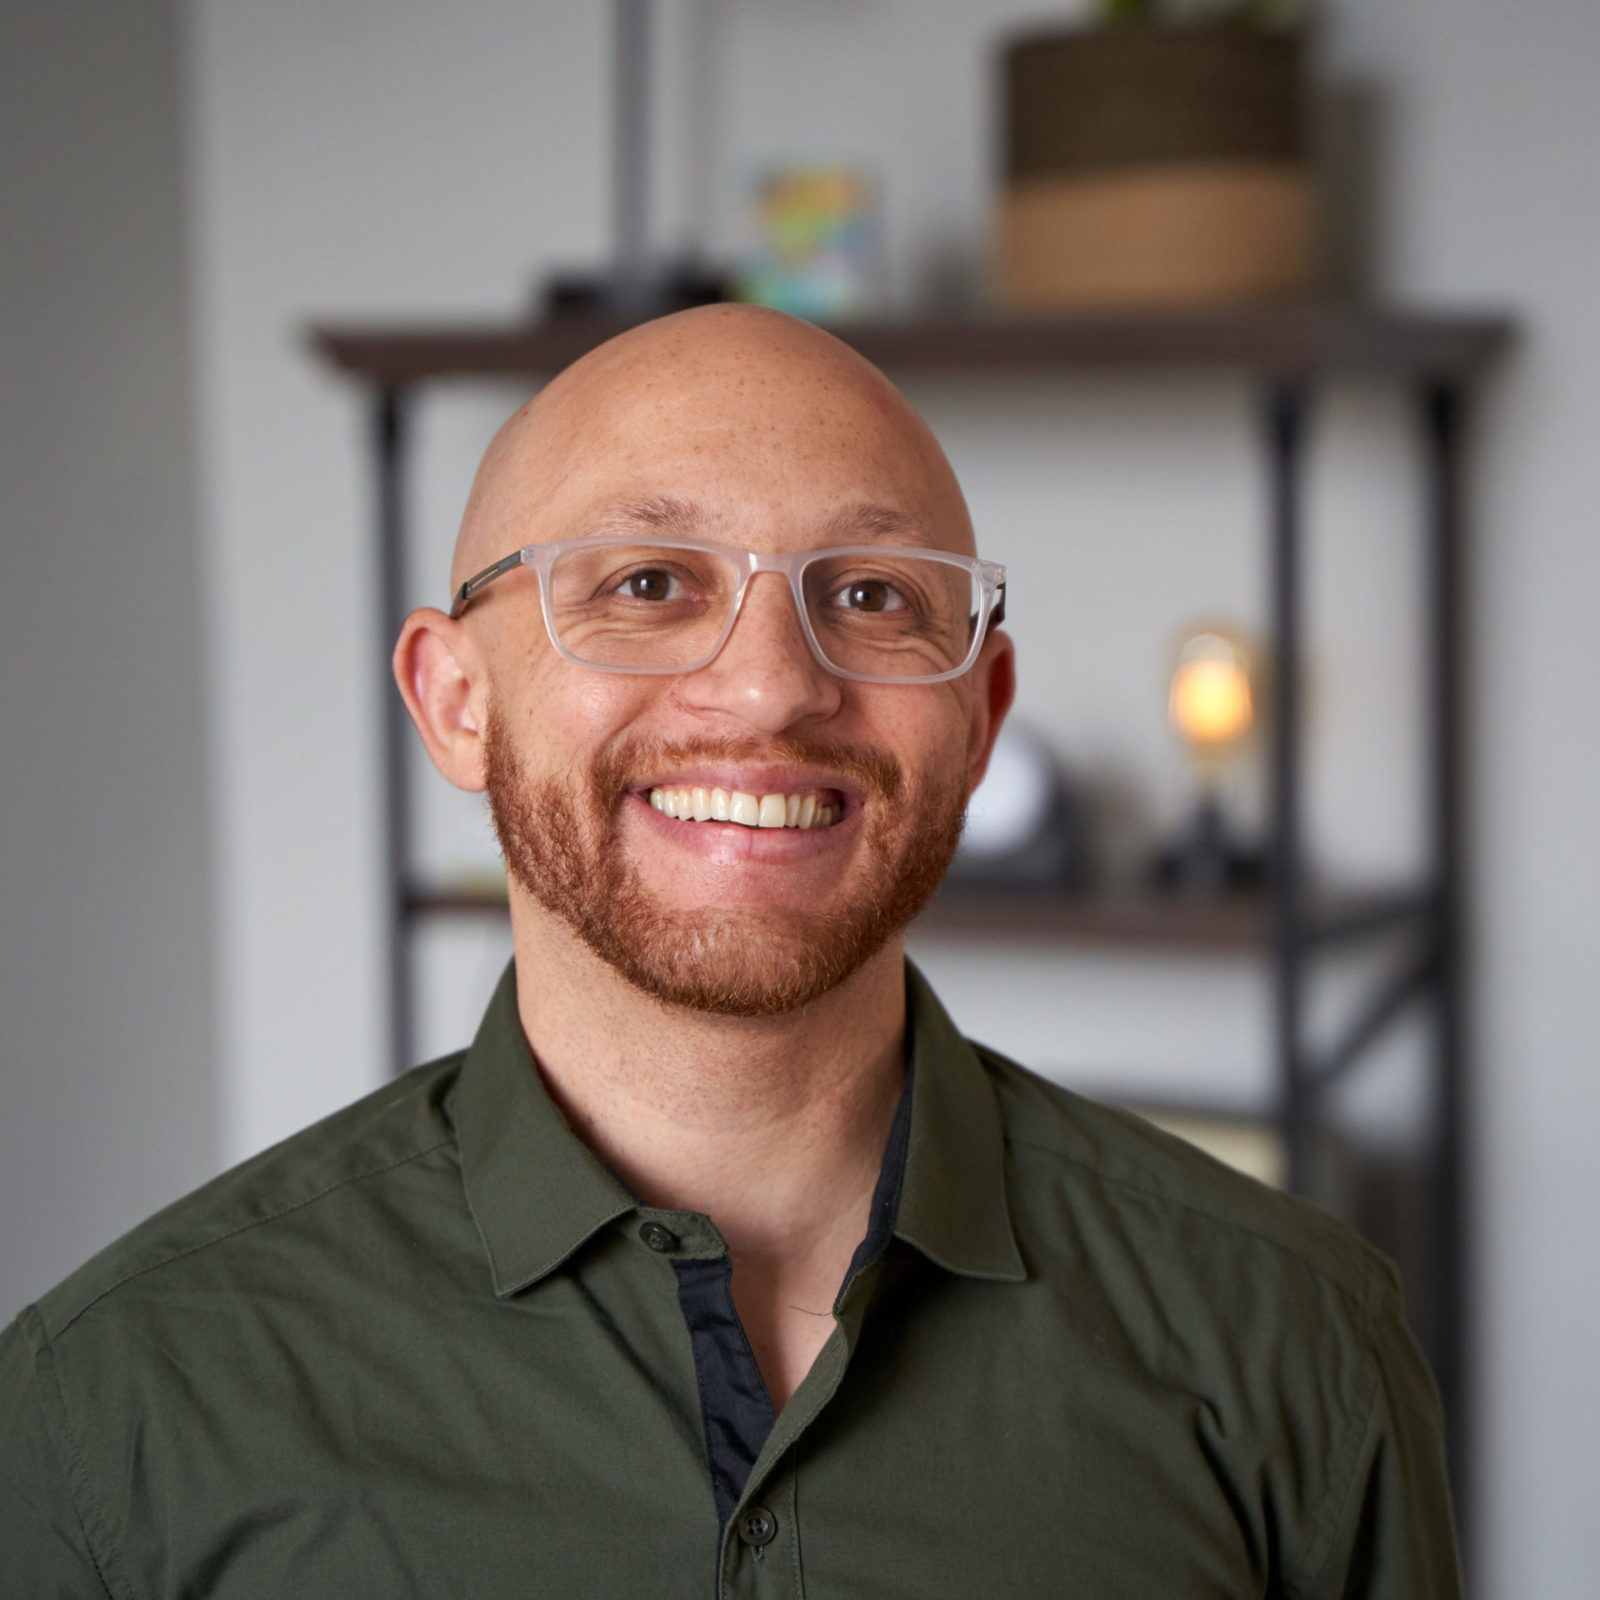 Caleb Dunn, therapist in Philadelphia with red facial hair, shaved head and brown eyes. Caleb Dunn is wearing a dark green button up shirt and clear glasses while looking at the camera smiling in an office at The Better You Institute with a shelf and light in the background.